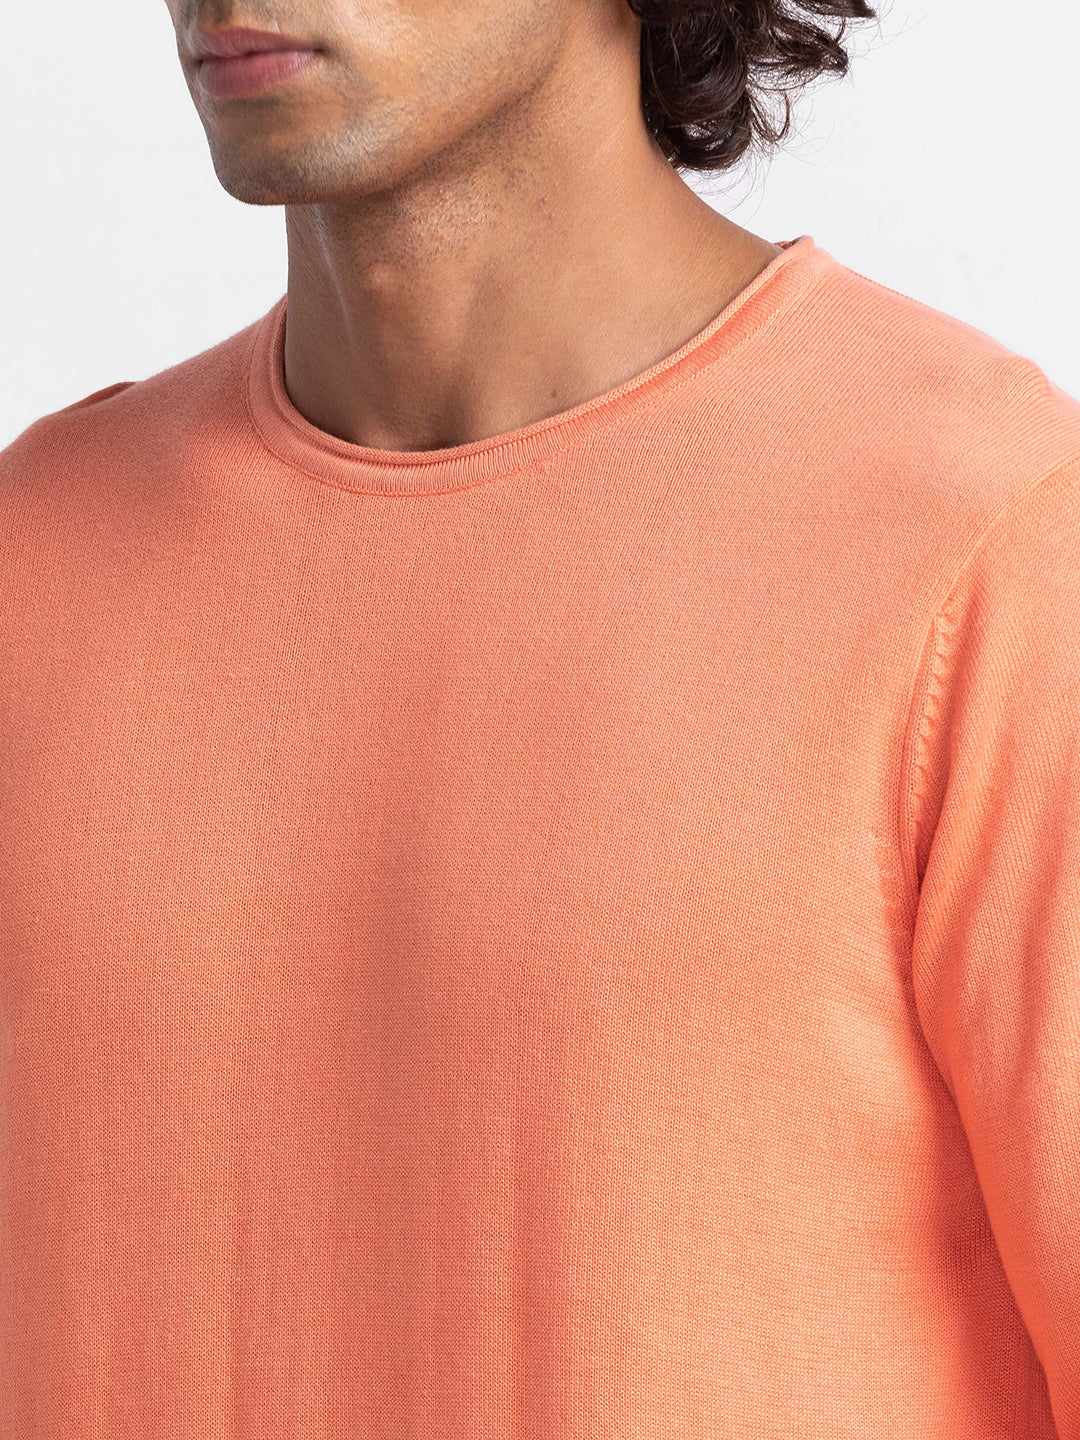 Spykar Coral Cotton Full Sleeve Casual Sweater For Men